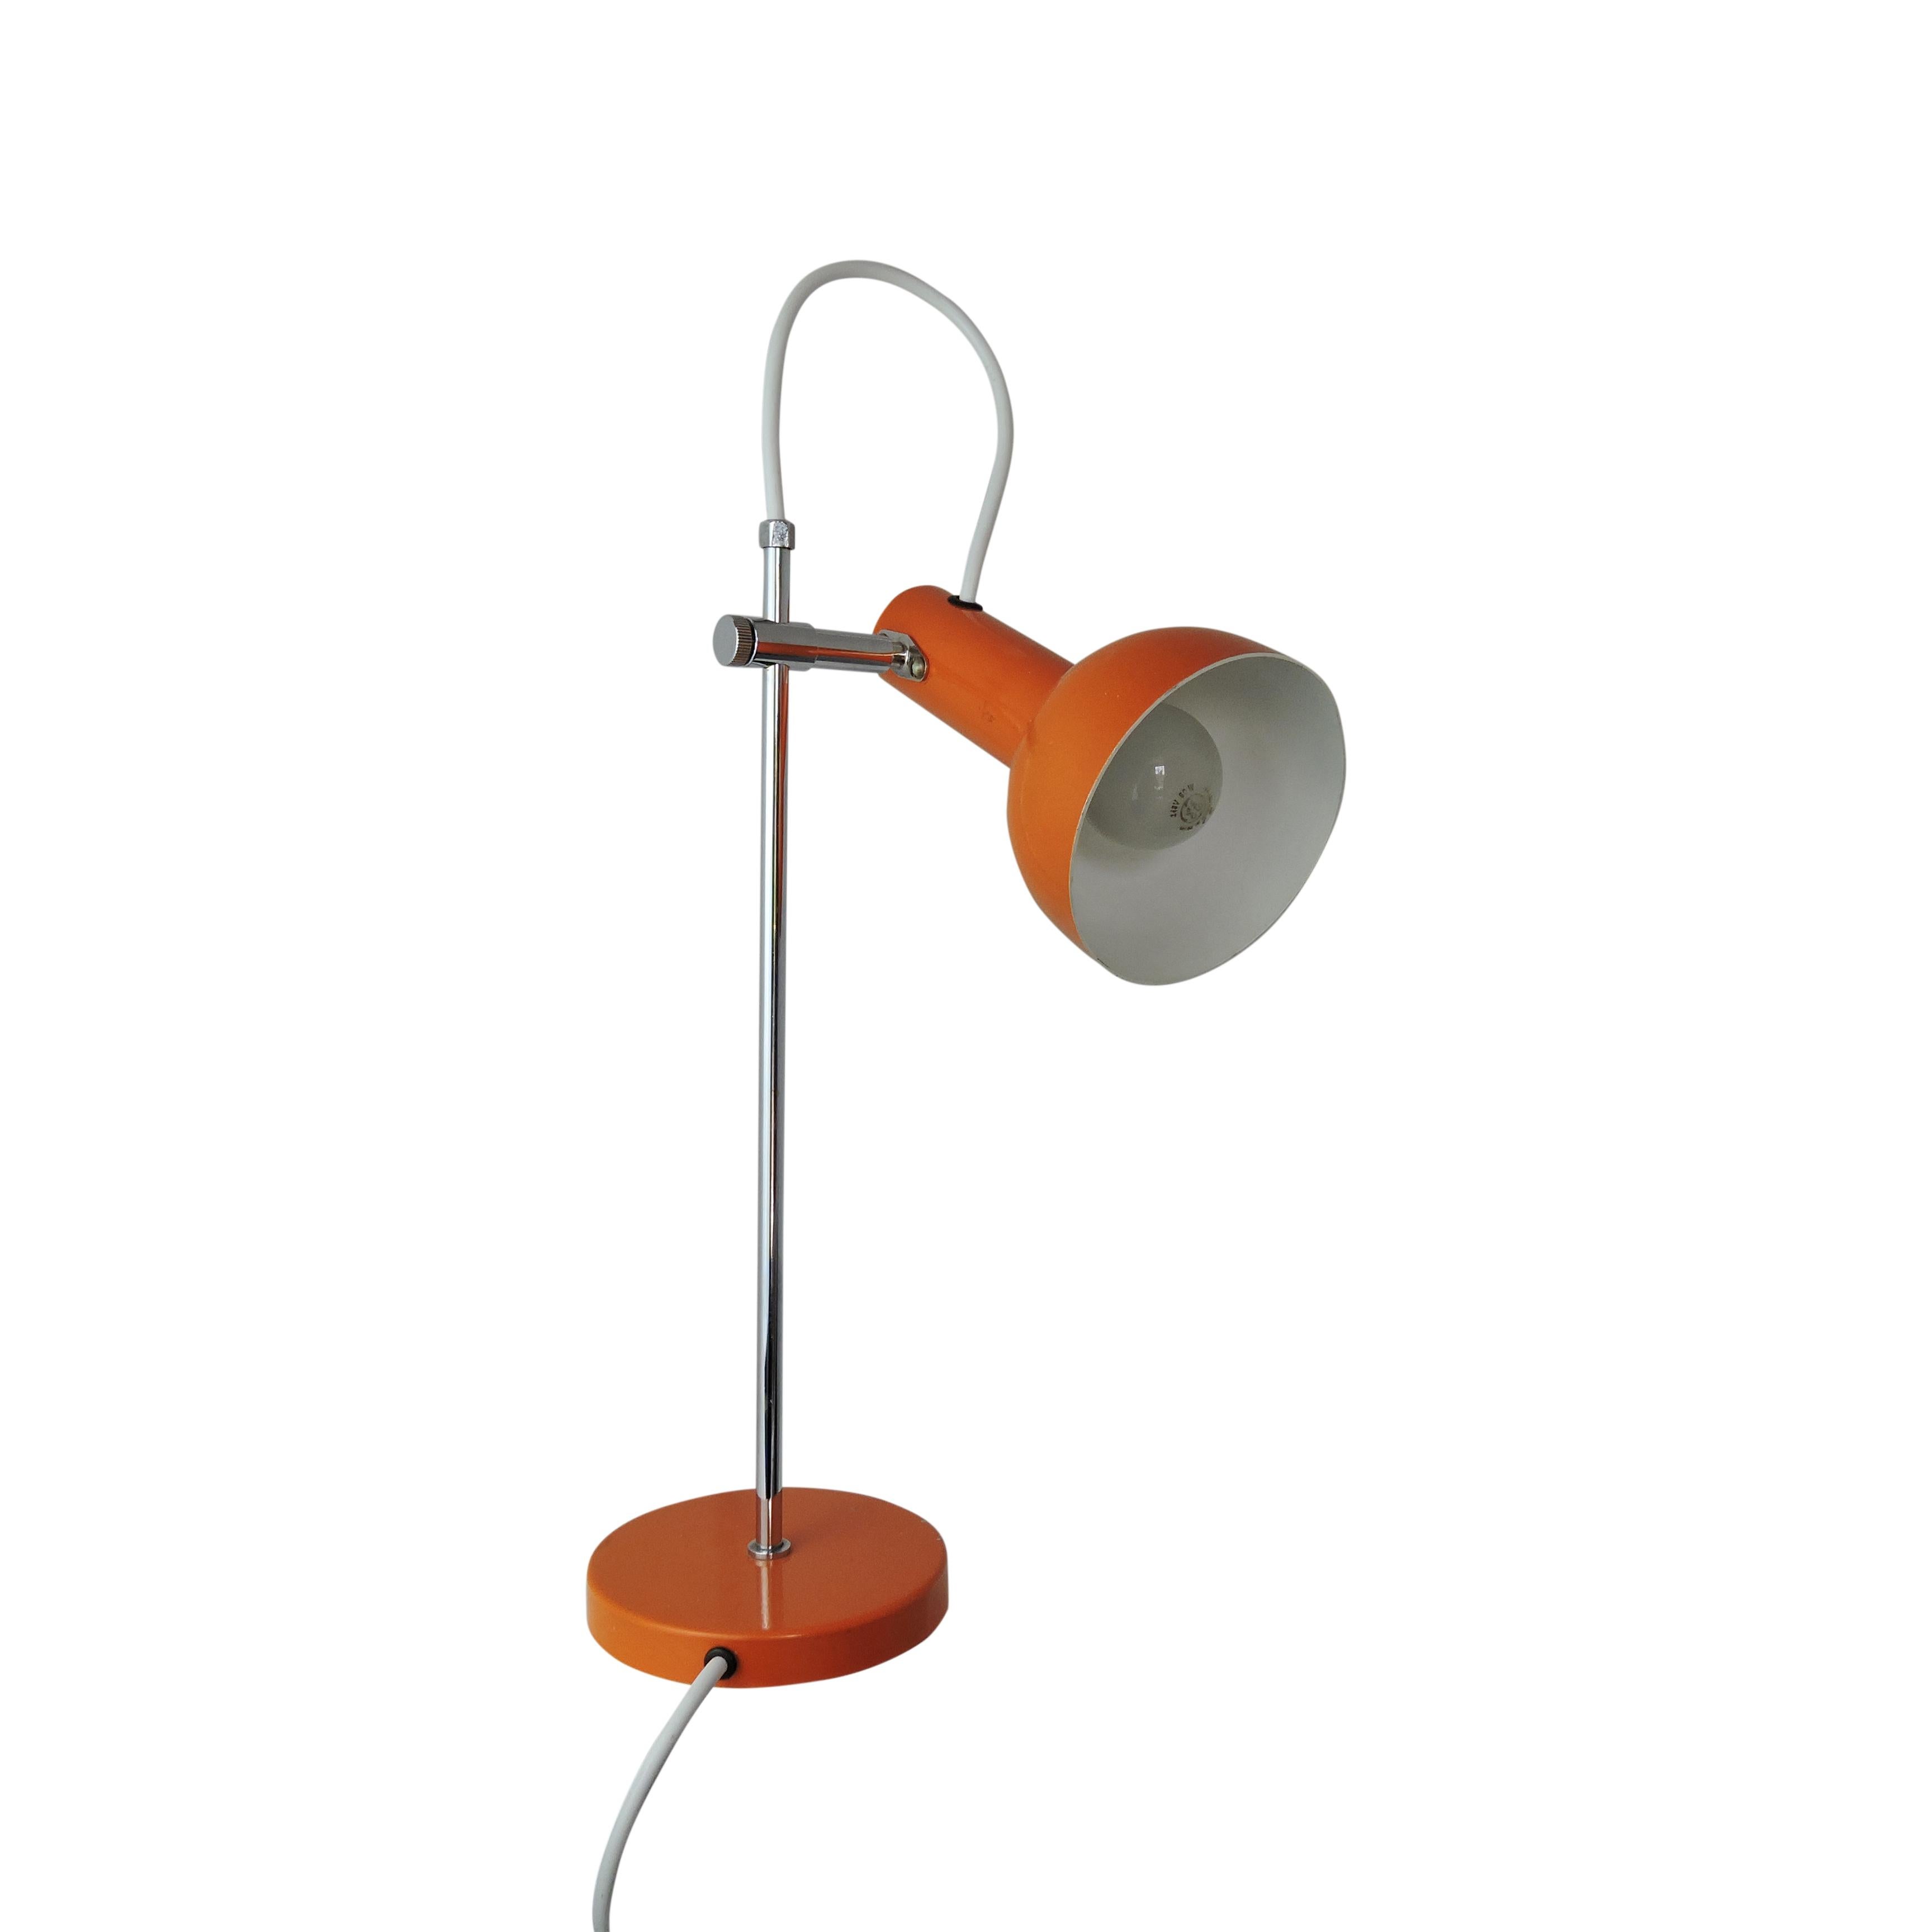 This orange desk lamp features an adjustable lampshade.